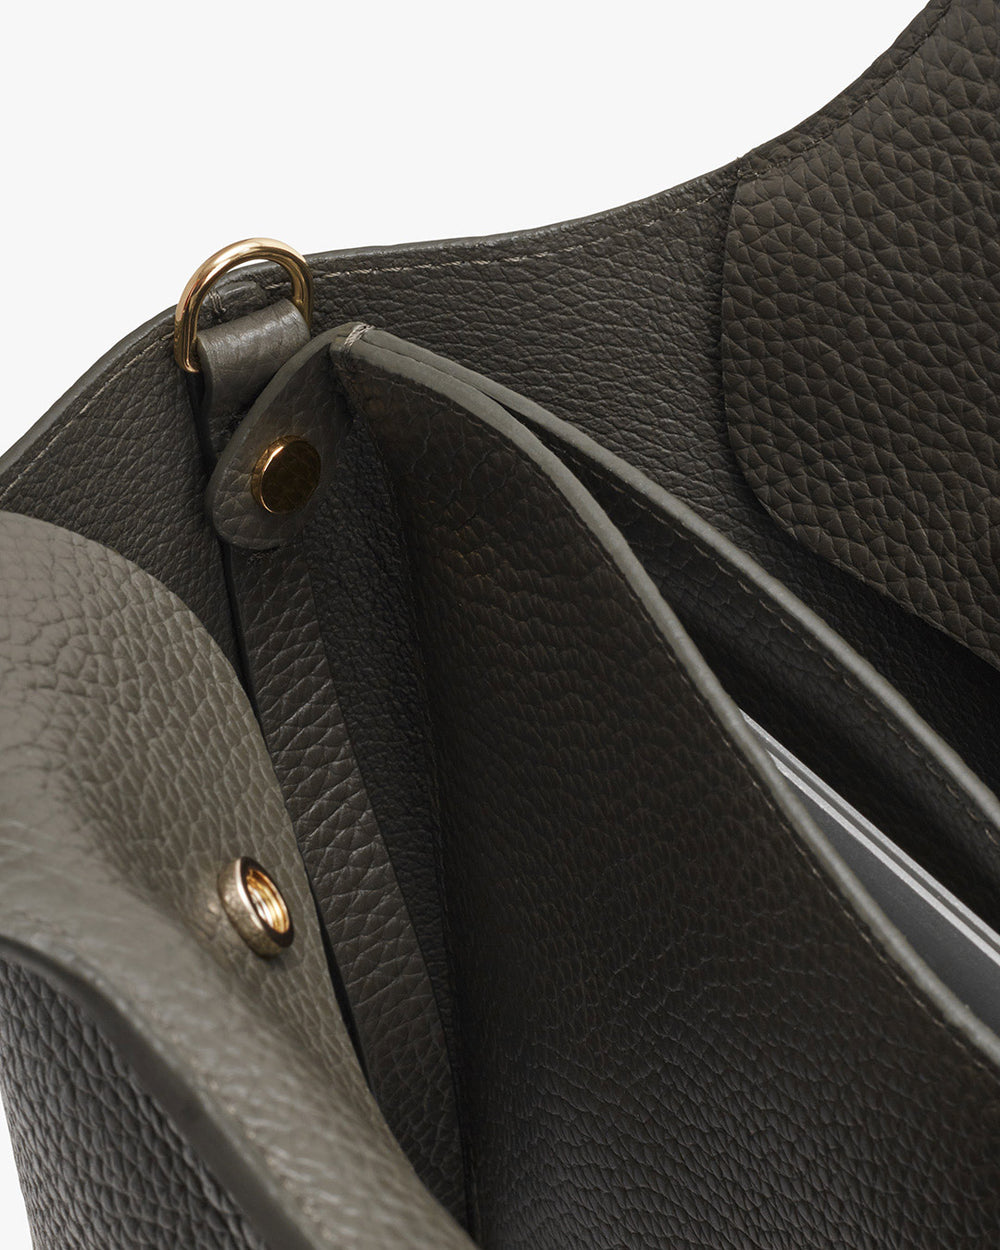 Close-up view of the top part of a leather bag with a snap button closure.